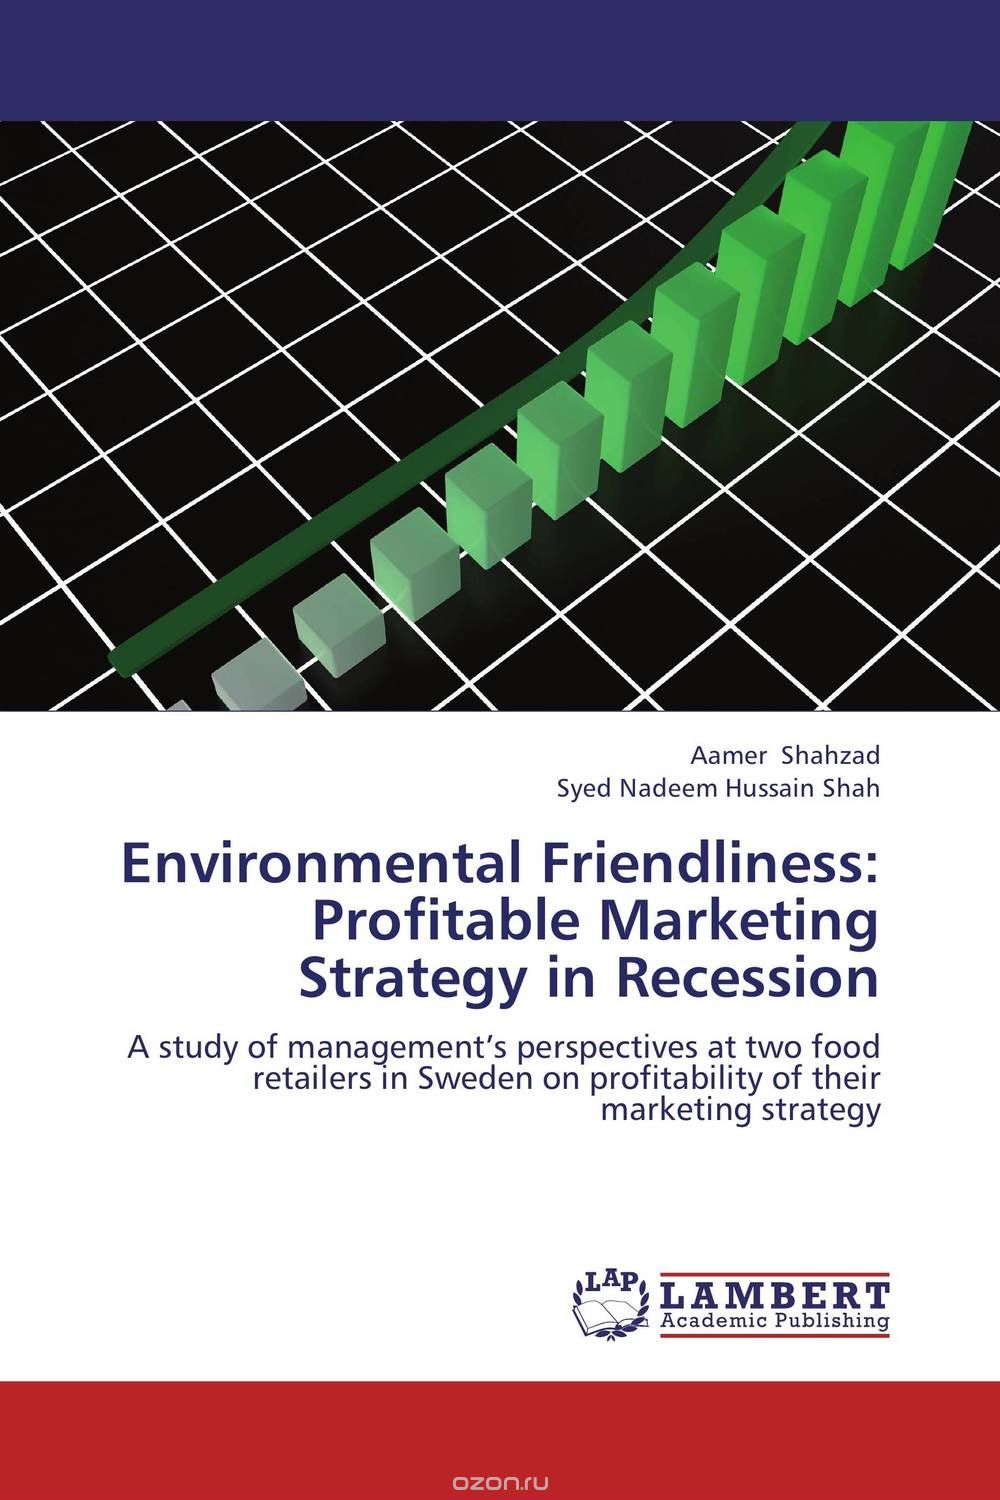 Environmental Friendliness: Profitable Marketing Strategy in Recession